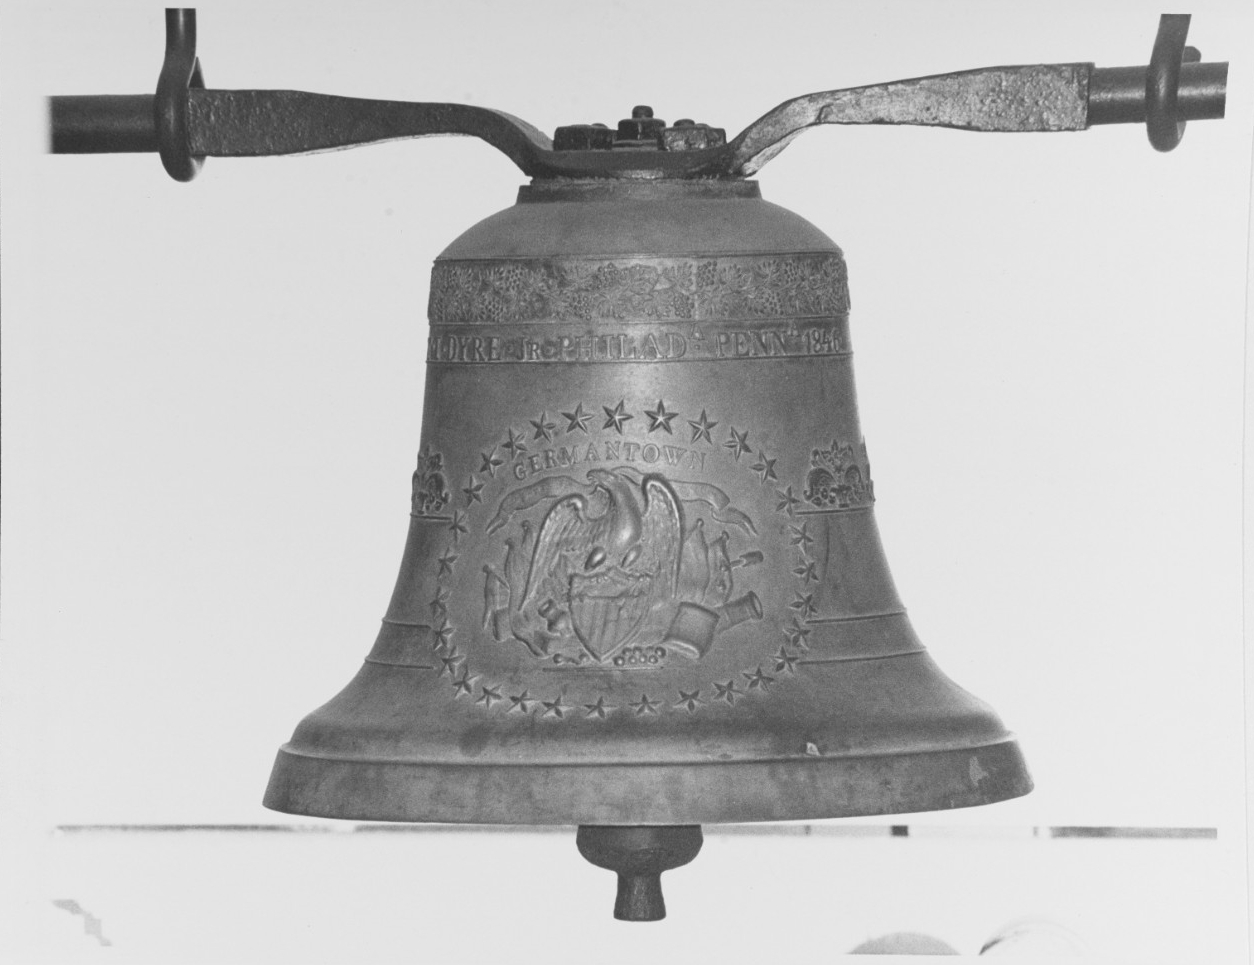 The Ship's Bell